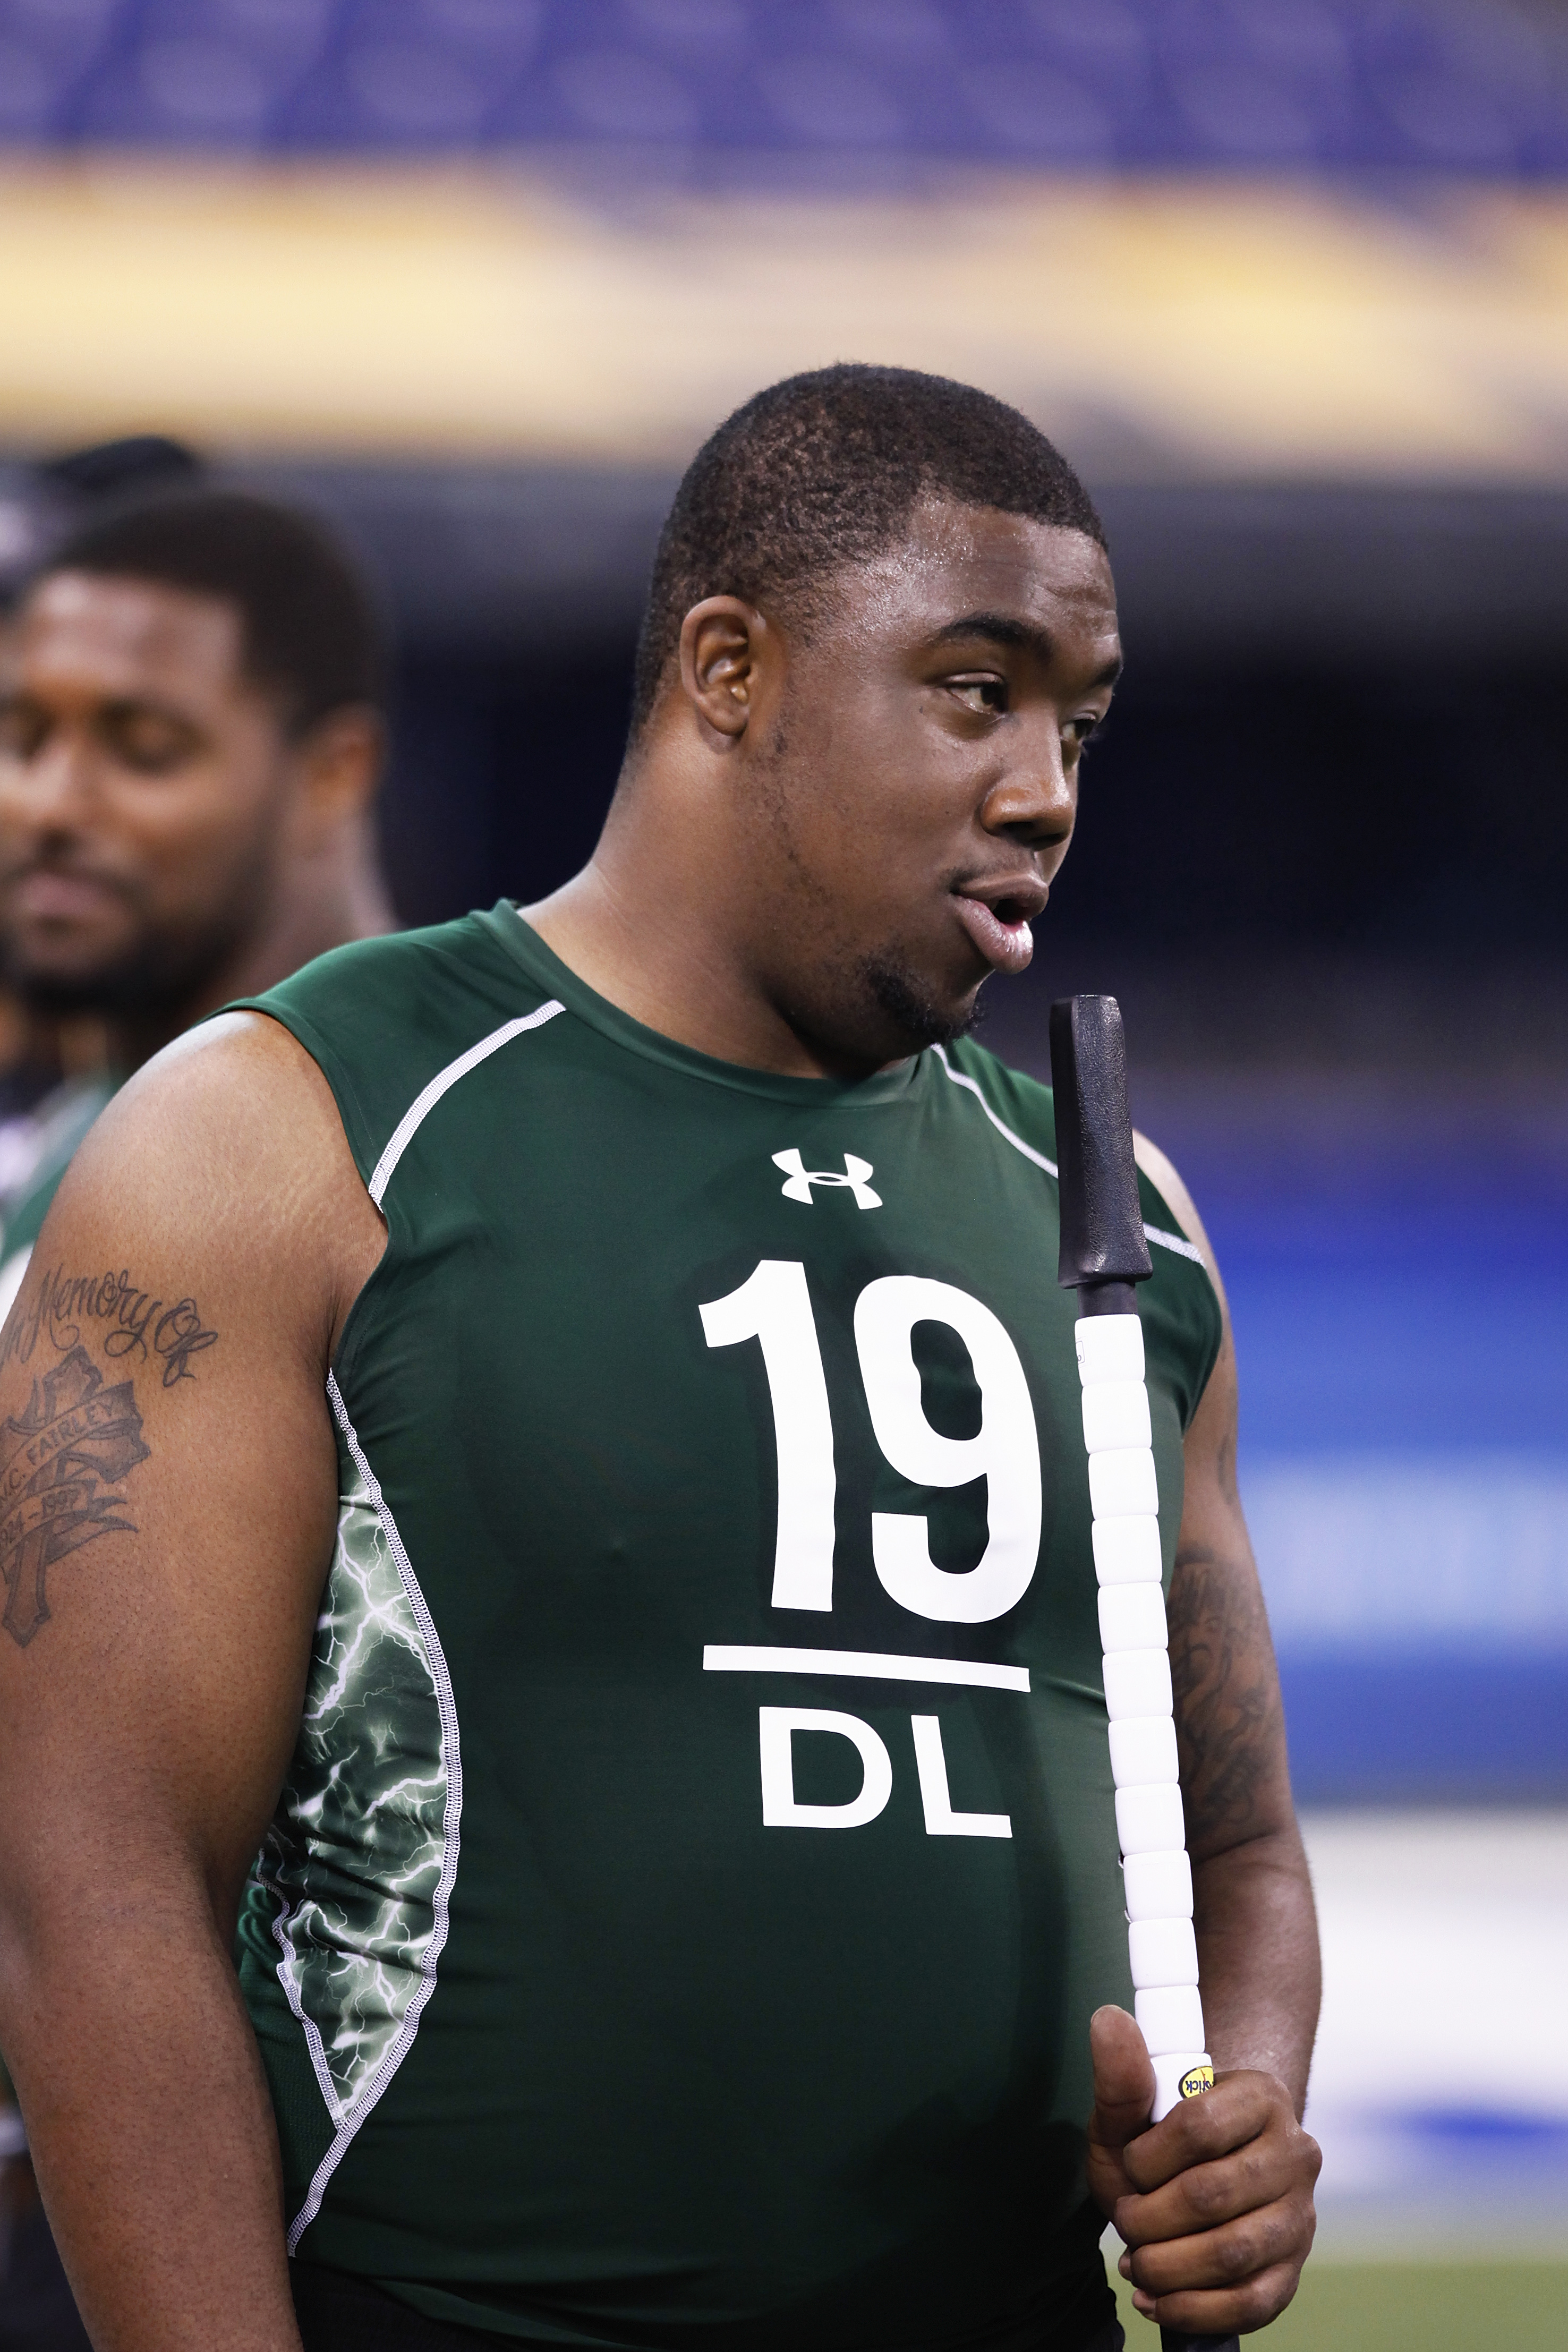 INDIANAPOLIS, IN - FEBRUARY 28: Defensive lineman Nick Fairley of Auburn looks on during the 2011 NFL Scouting Combine at Lucas Oil Stadium on February 28, 2011 in Indianapolis, Indiana. (Photo by Joe Robbins/Getty Images)